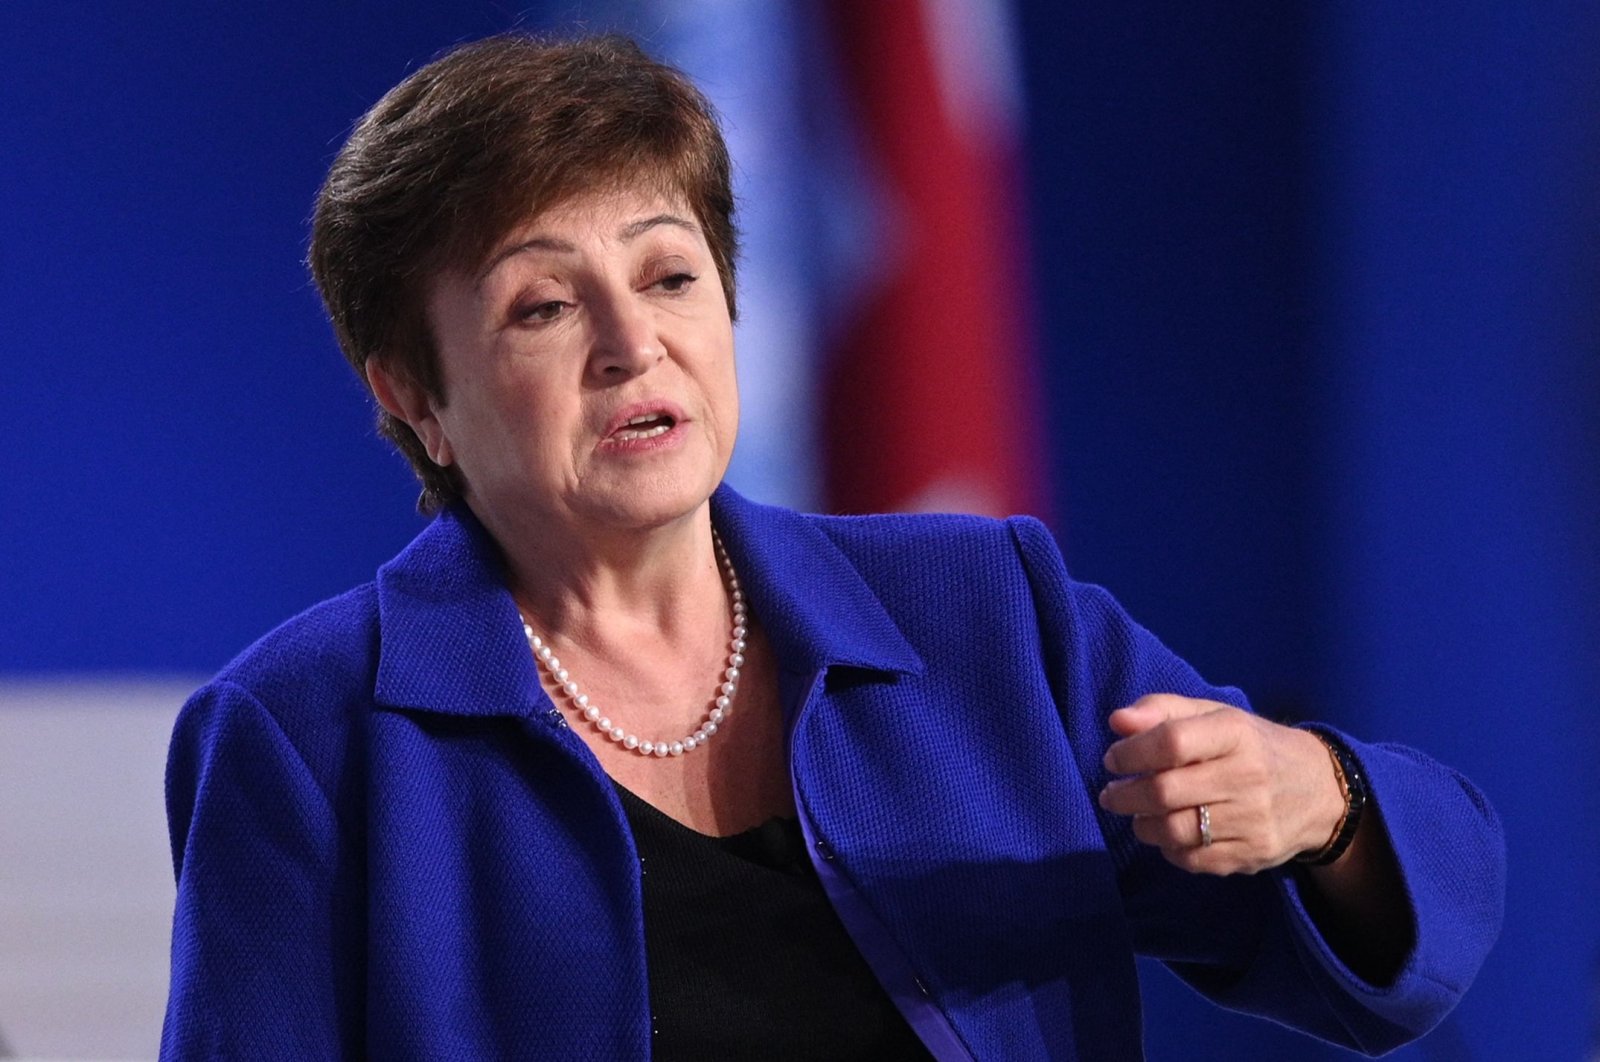 IMF Managing Director Kristalina Georgieva speaks during a panel discussion at the COP26 U.N. Climate Summit in Glasgow, Scotland, Nov. 3, 2021. (AFP Photo)